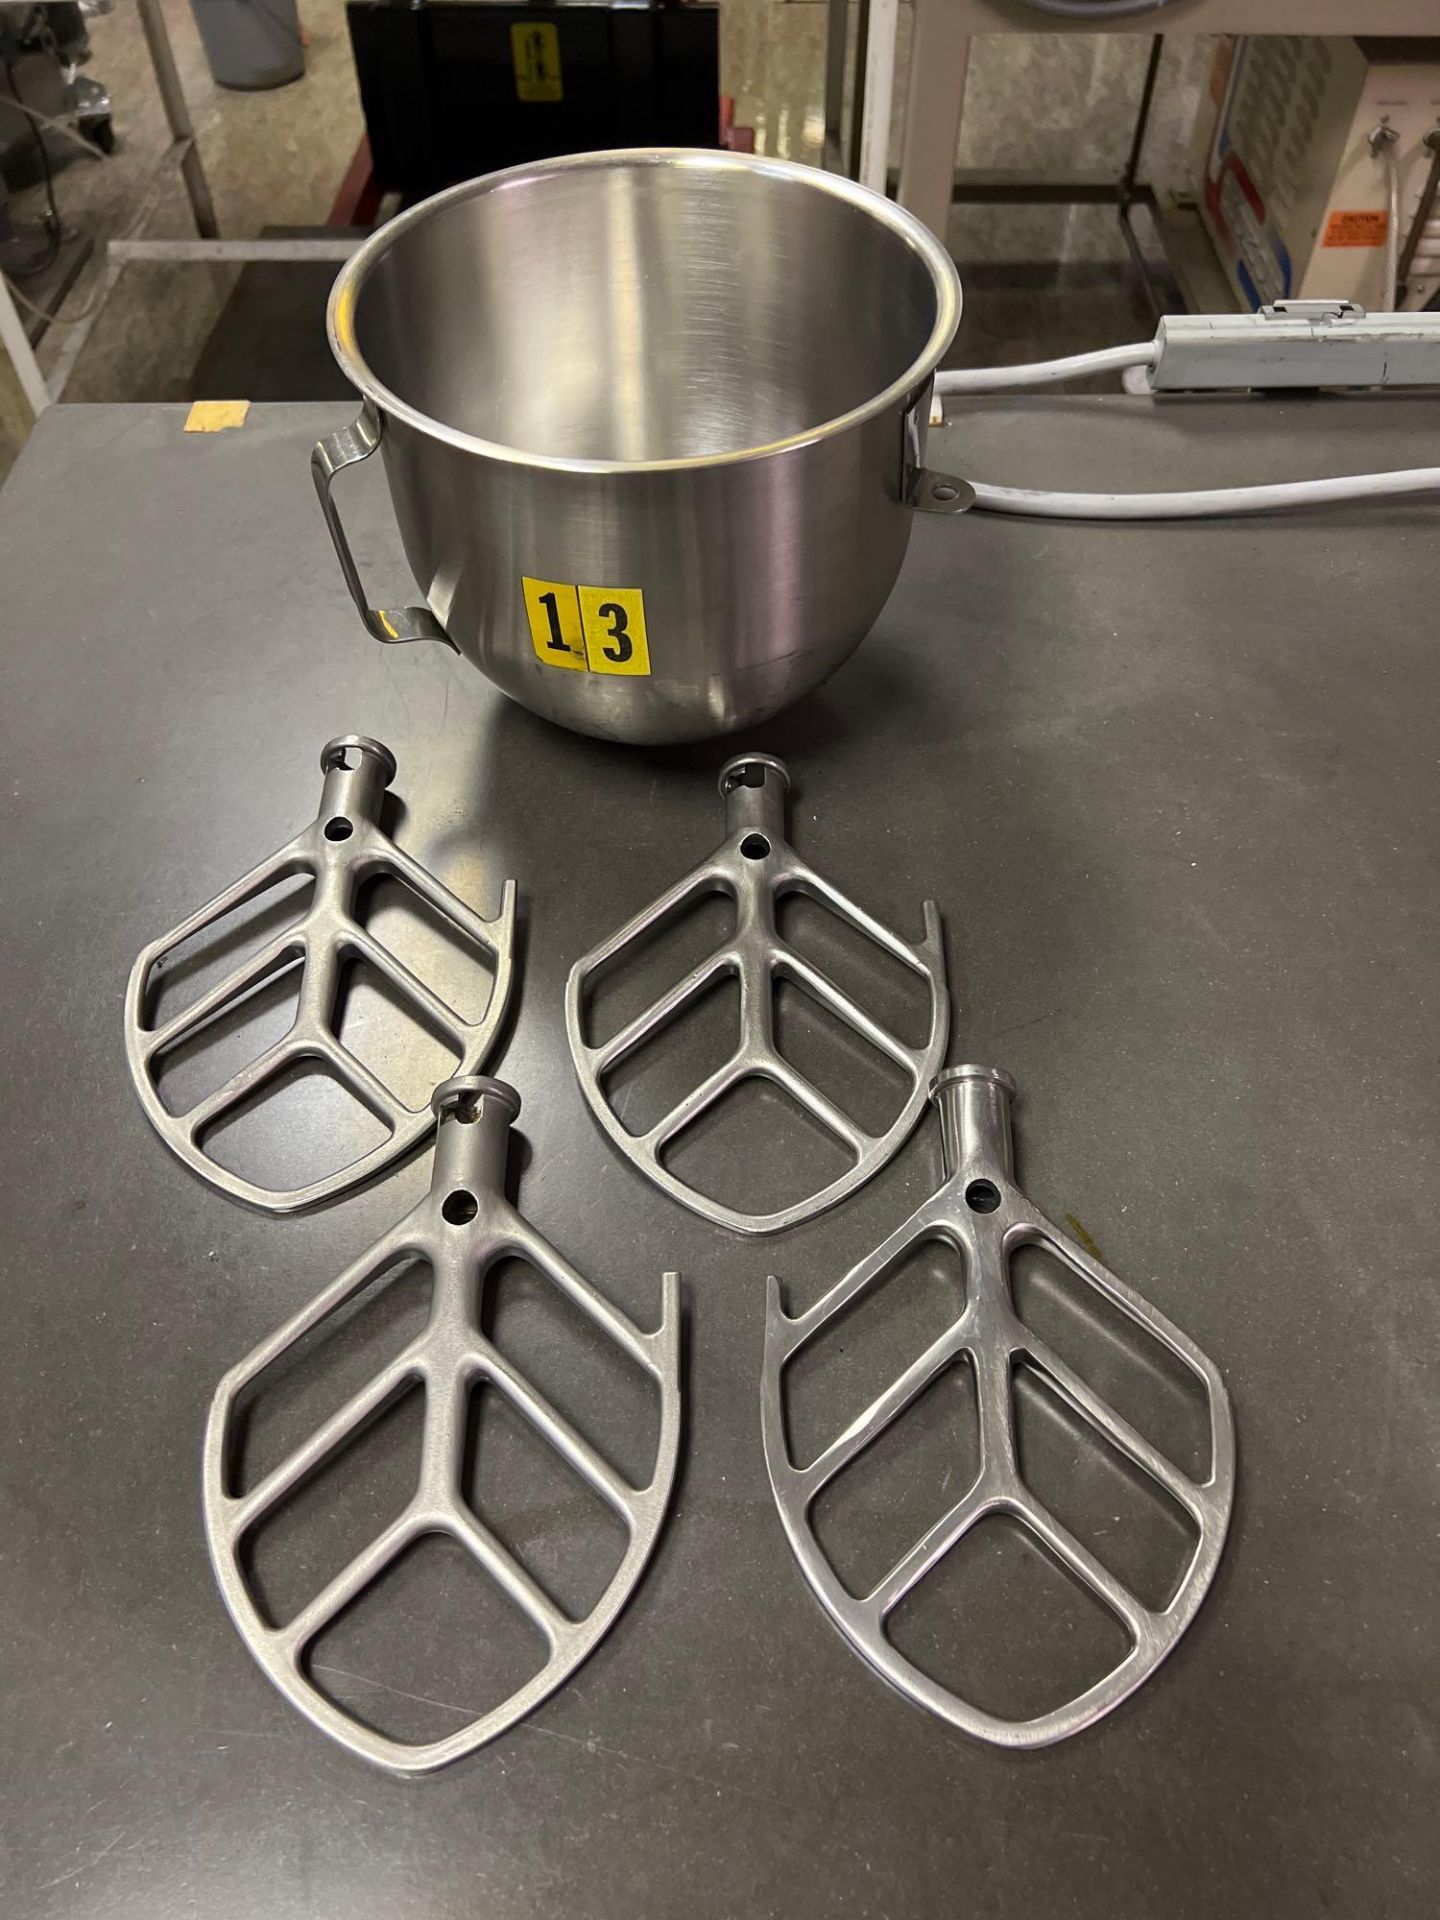 Lot of (4) Stainless Steel B Beater Paddles and (1) Stainless Steel Bowl for N-50 Hobart Mixers